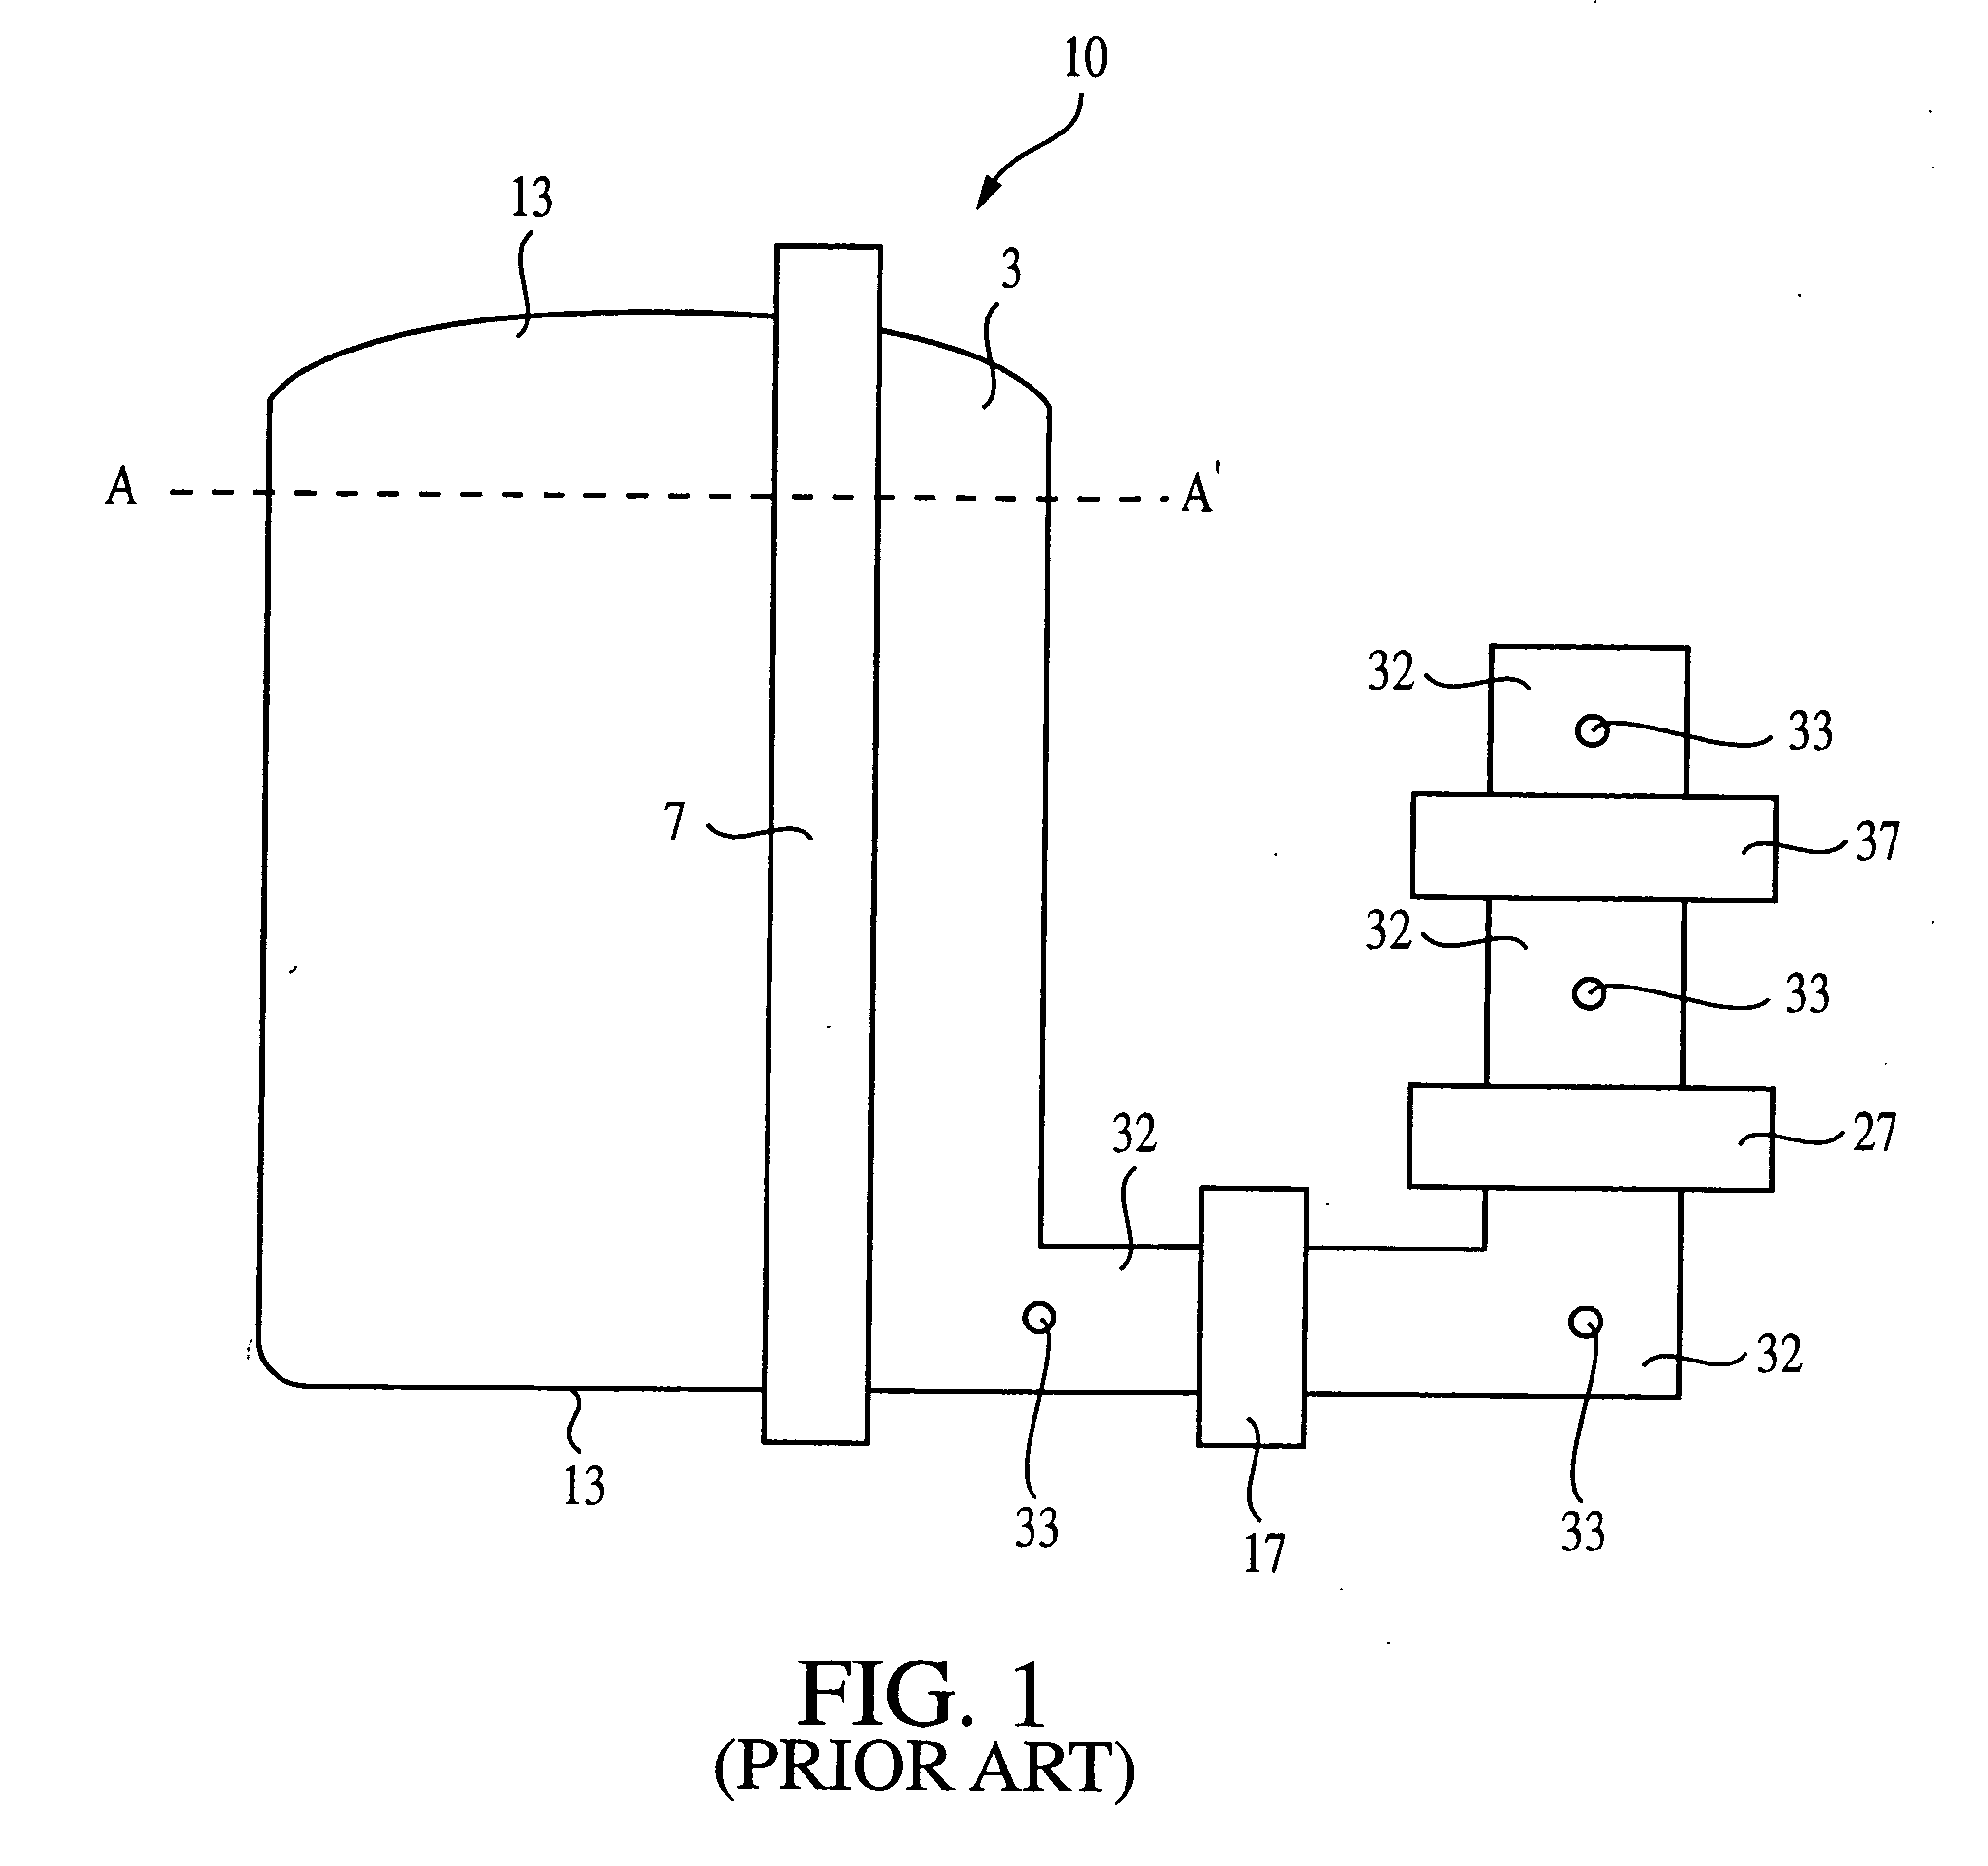 Double pinned photodiode for CMOS APS and method of formation